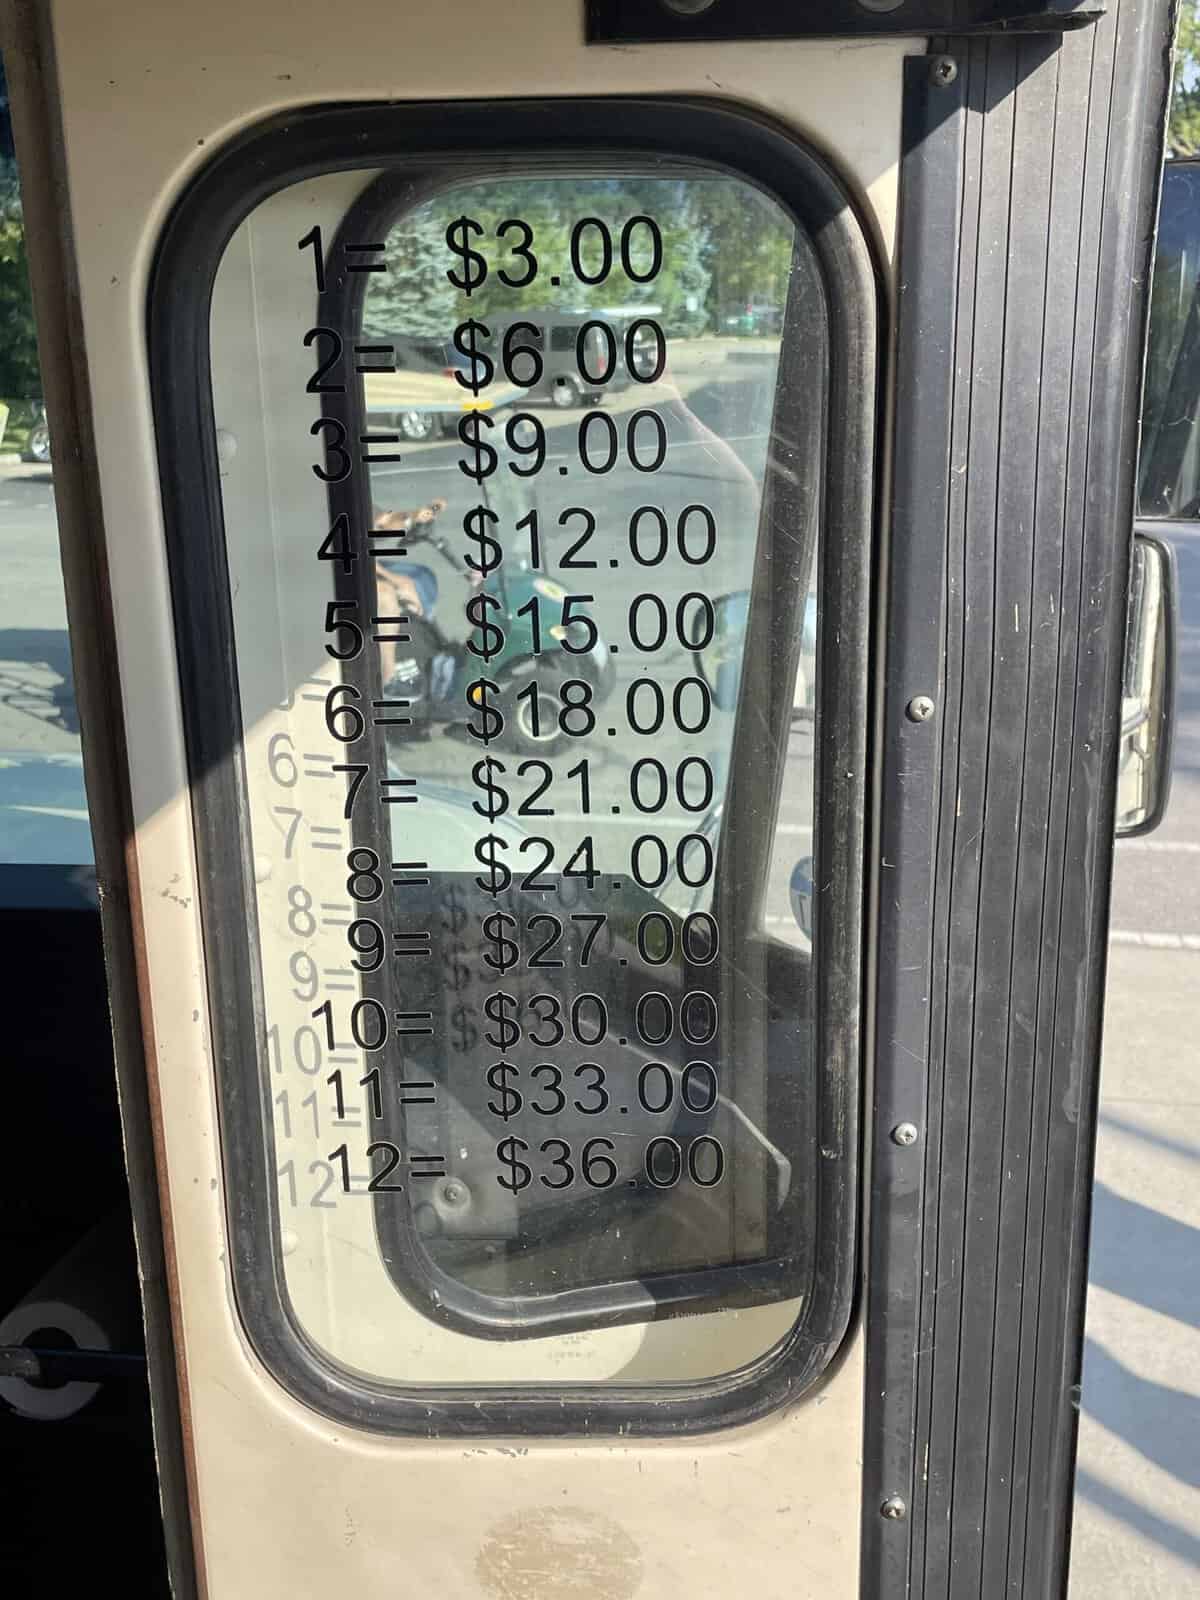 The door of an old school bus converted to a tourist transport in Put-In-Bay, Ohio. On the window of the door is a list of the costs for various numbers of passengers taking a ride. The first line reads 1=$3.00. The second reads 2=$6.00. And so on up through 12=$36.00.